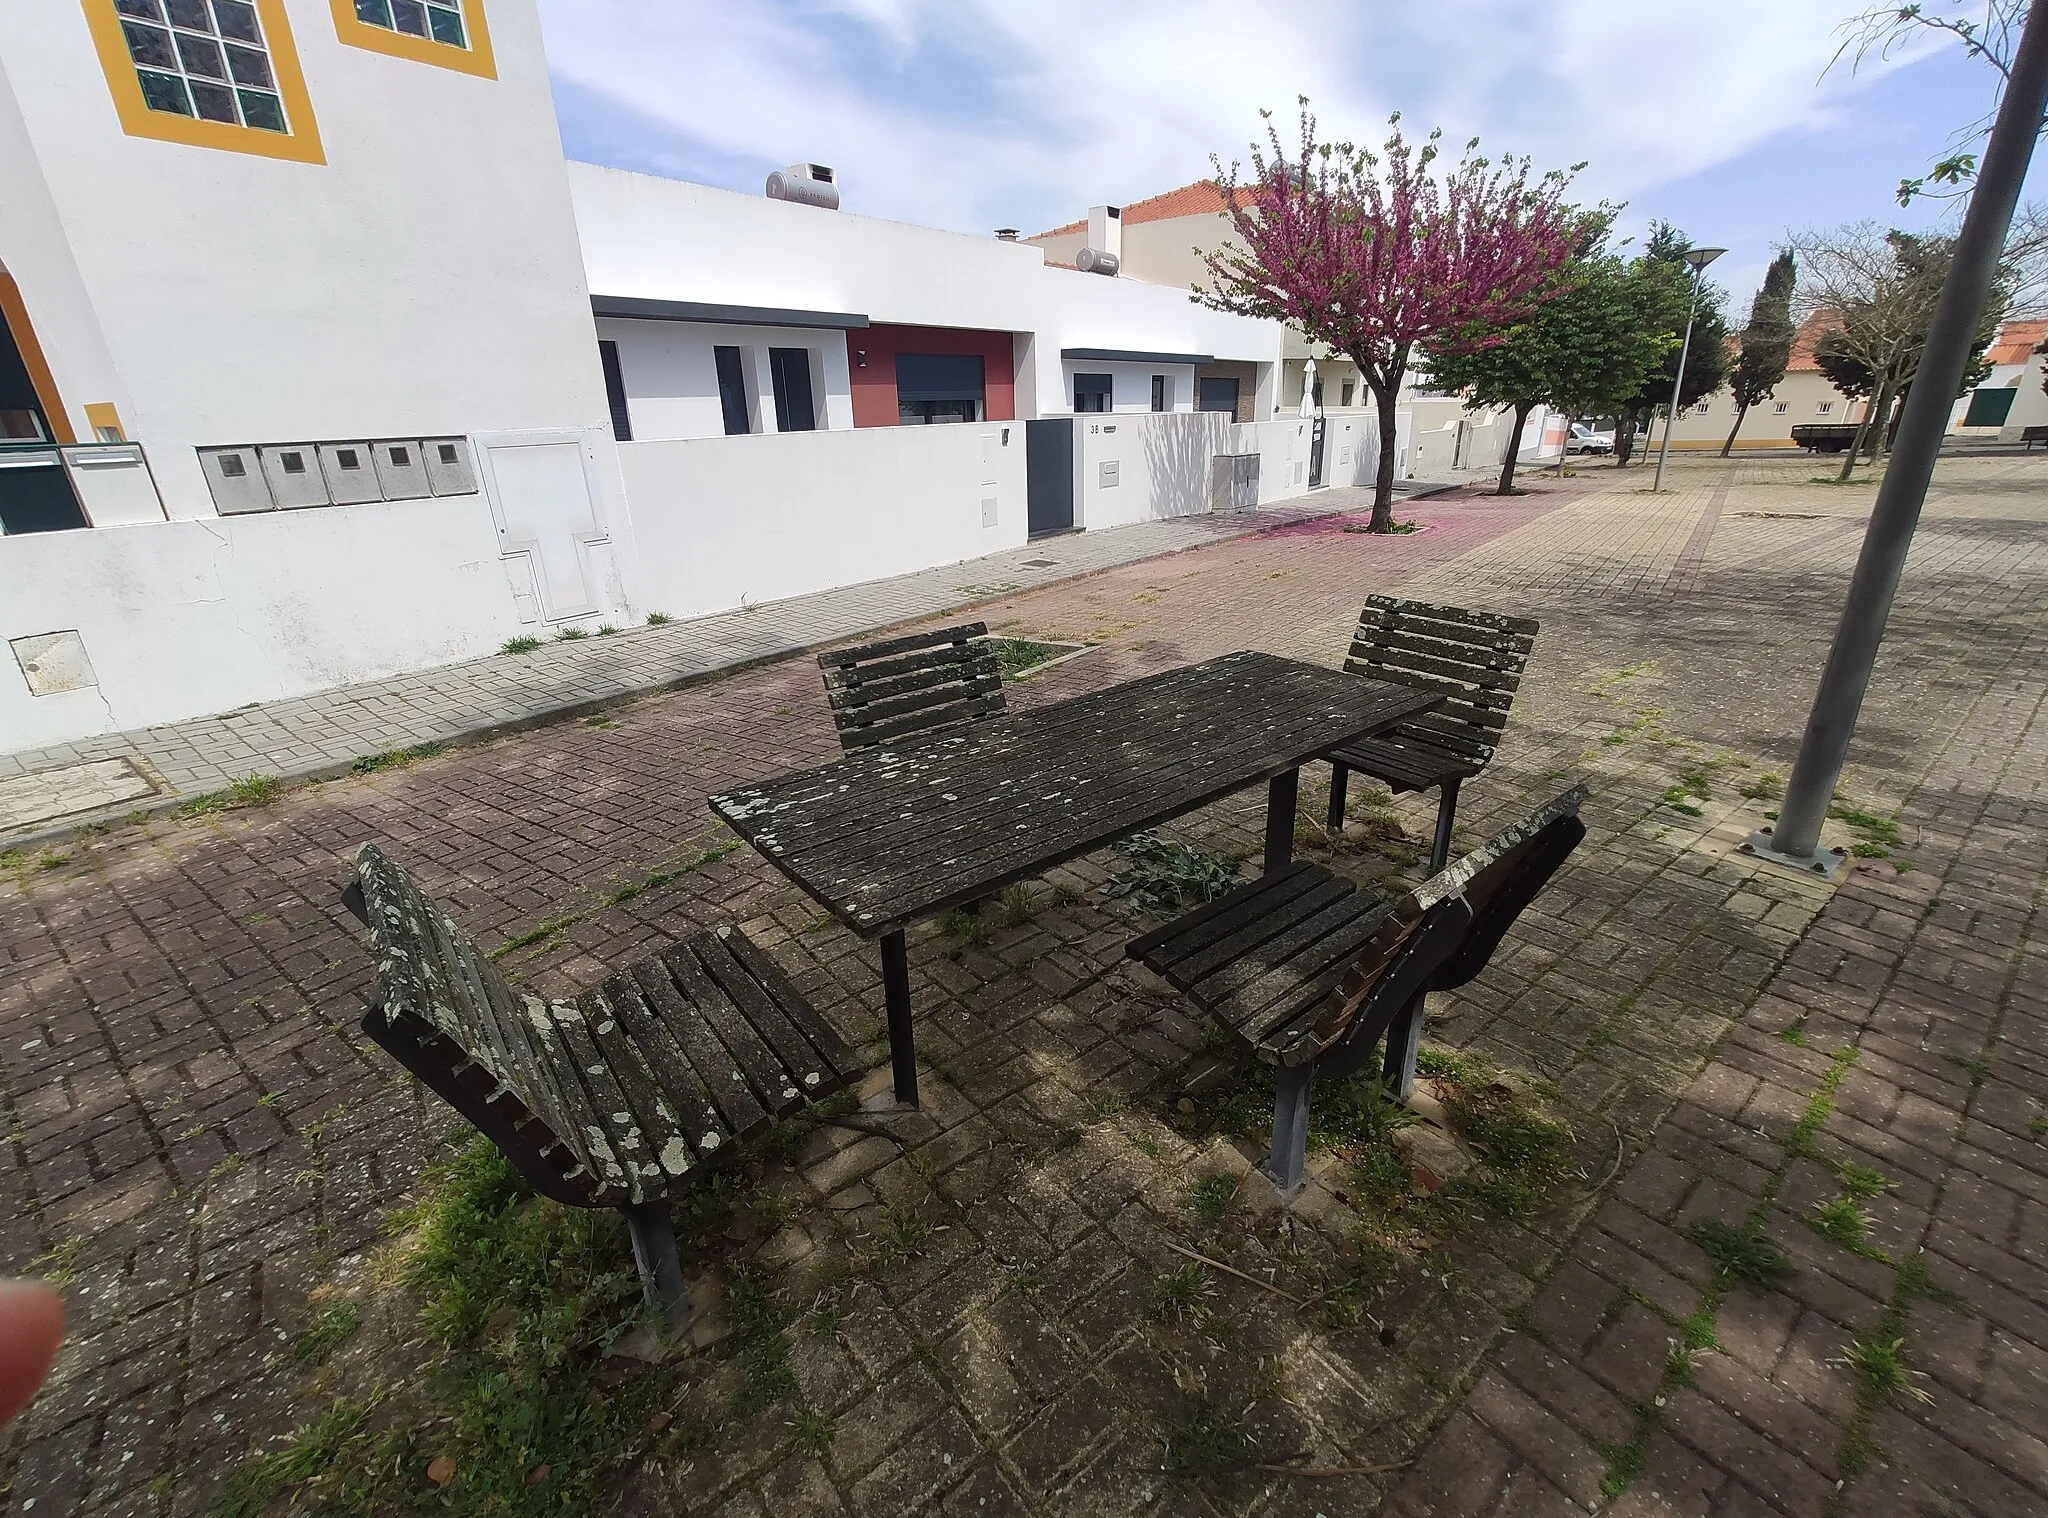 Photo showing: A picnic table with 4 seats that have backrest, there's shadow from a tree
The seats are "ergonomic" as they have a slight slope to make it more confortable